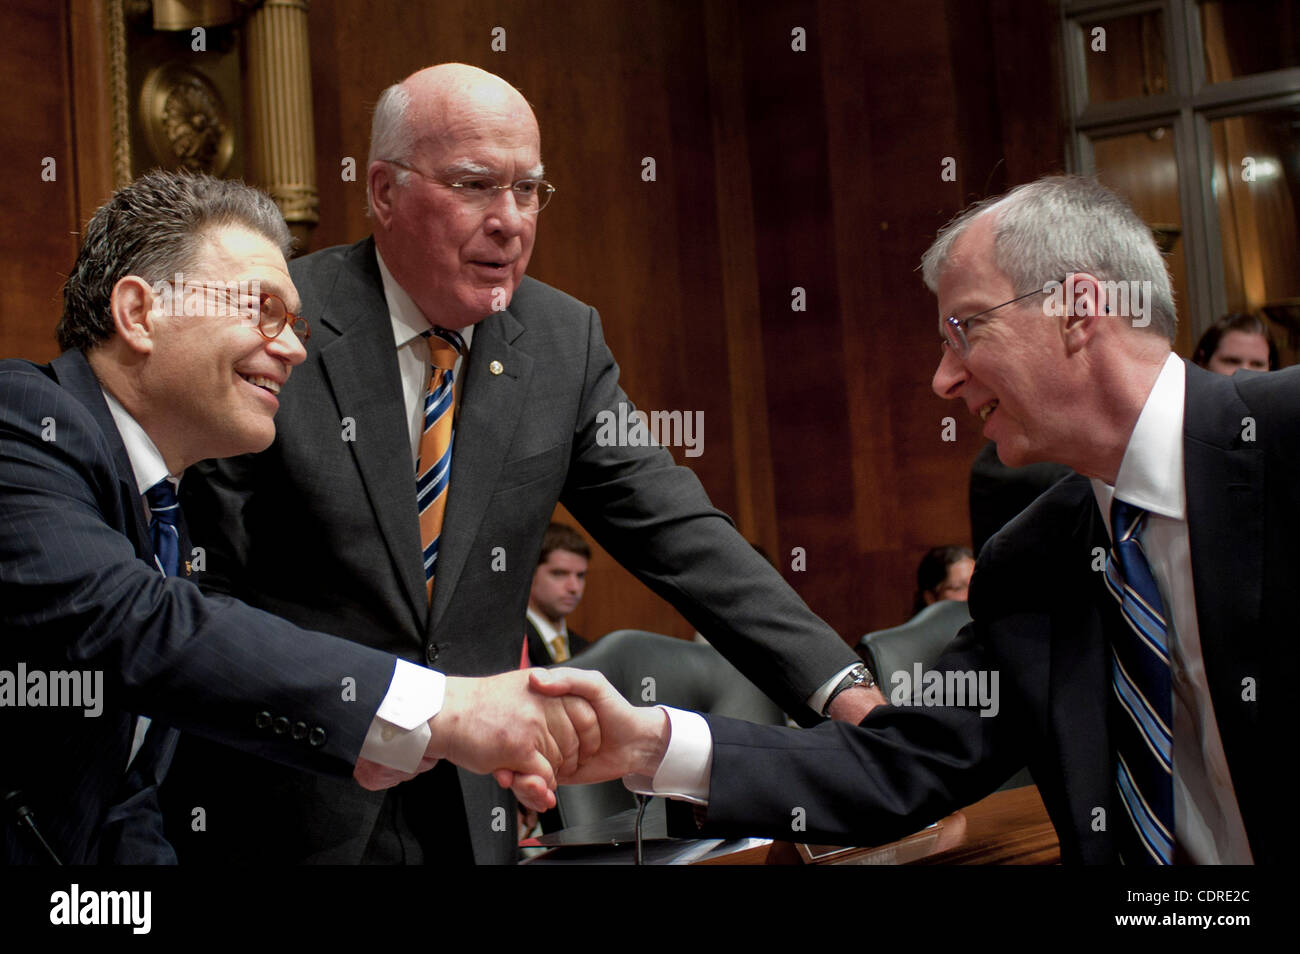 May 10, 2011 - Washington, District of Columbia, U.S. - GUY ''BUD'' TRIBBLE, vice president of software technology at Apple, Inc., is greeted by Senators AL FRANKEN (D-MN) and PATRICK LEAHY (D- VT) before testifying before a Senate Privacy, Technology and the Law Subcommittee hearing on ''Protecting Stock Photo